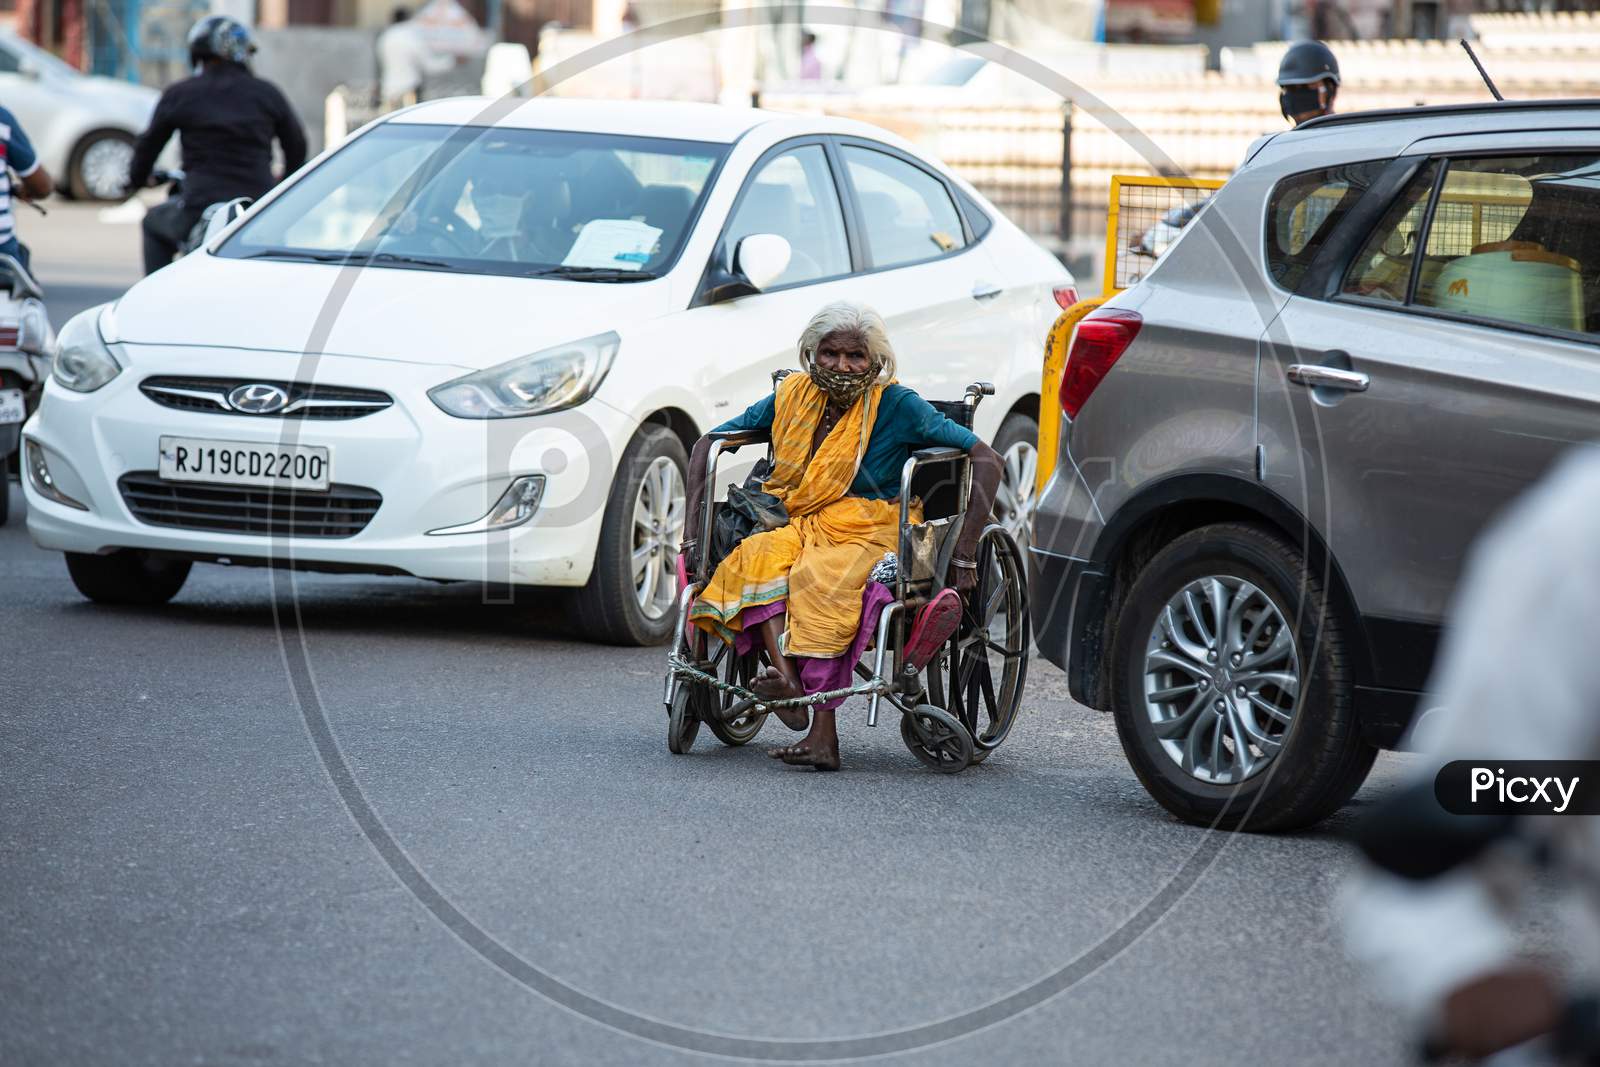 Jodhpur, Rajasthan, India - May 20 2020: Poor Helpless Handicapped Old Woman Sitting In Wheelchair Wearing Mask Roaming On Road During Covid-19 Lockdown Crisis, No Food To Eat No Place To Go.